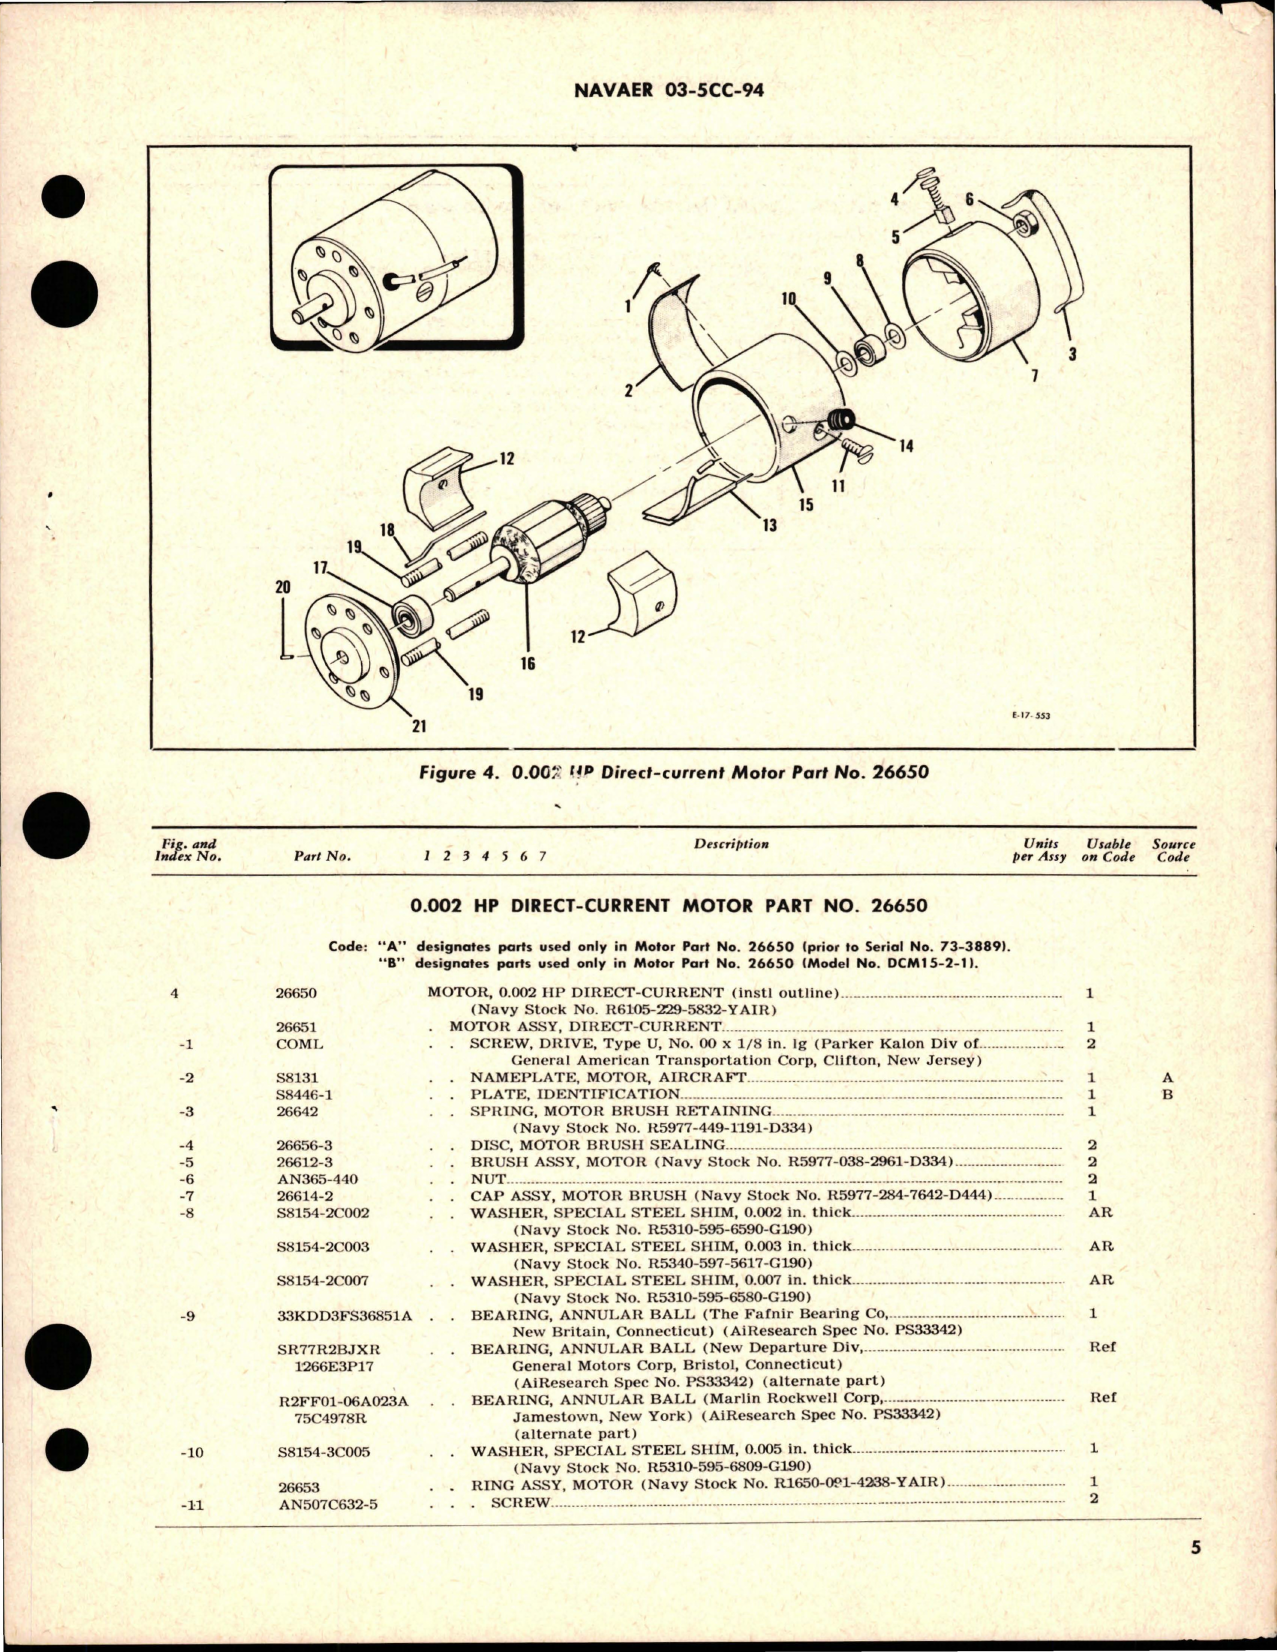 Sample page 5 from AirCorps Library document: Overhaul Instructions with Parts Breakdown for Direct-Current Motor 0.002 HP - Part 26650 - Model DCM15-2-1